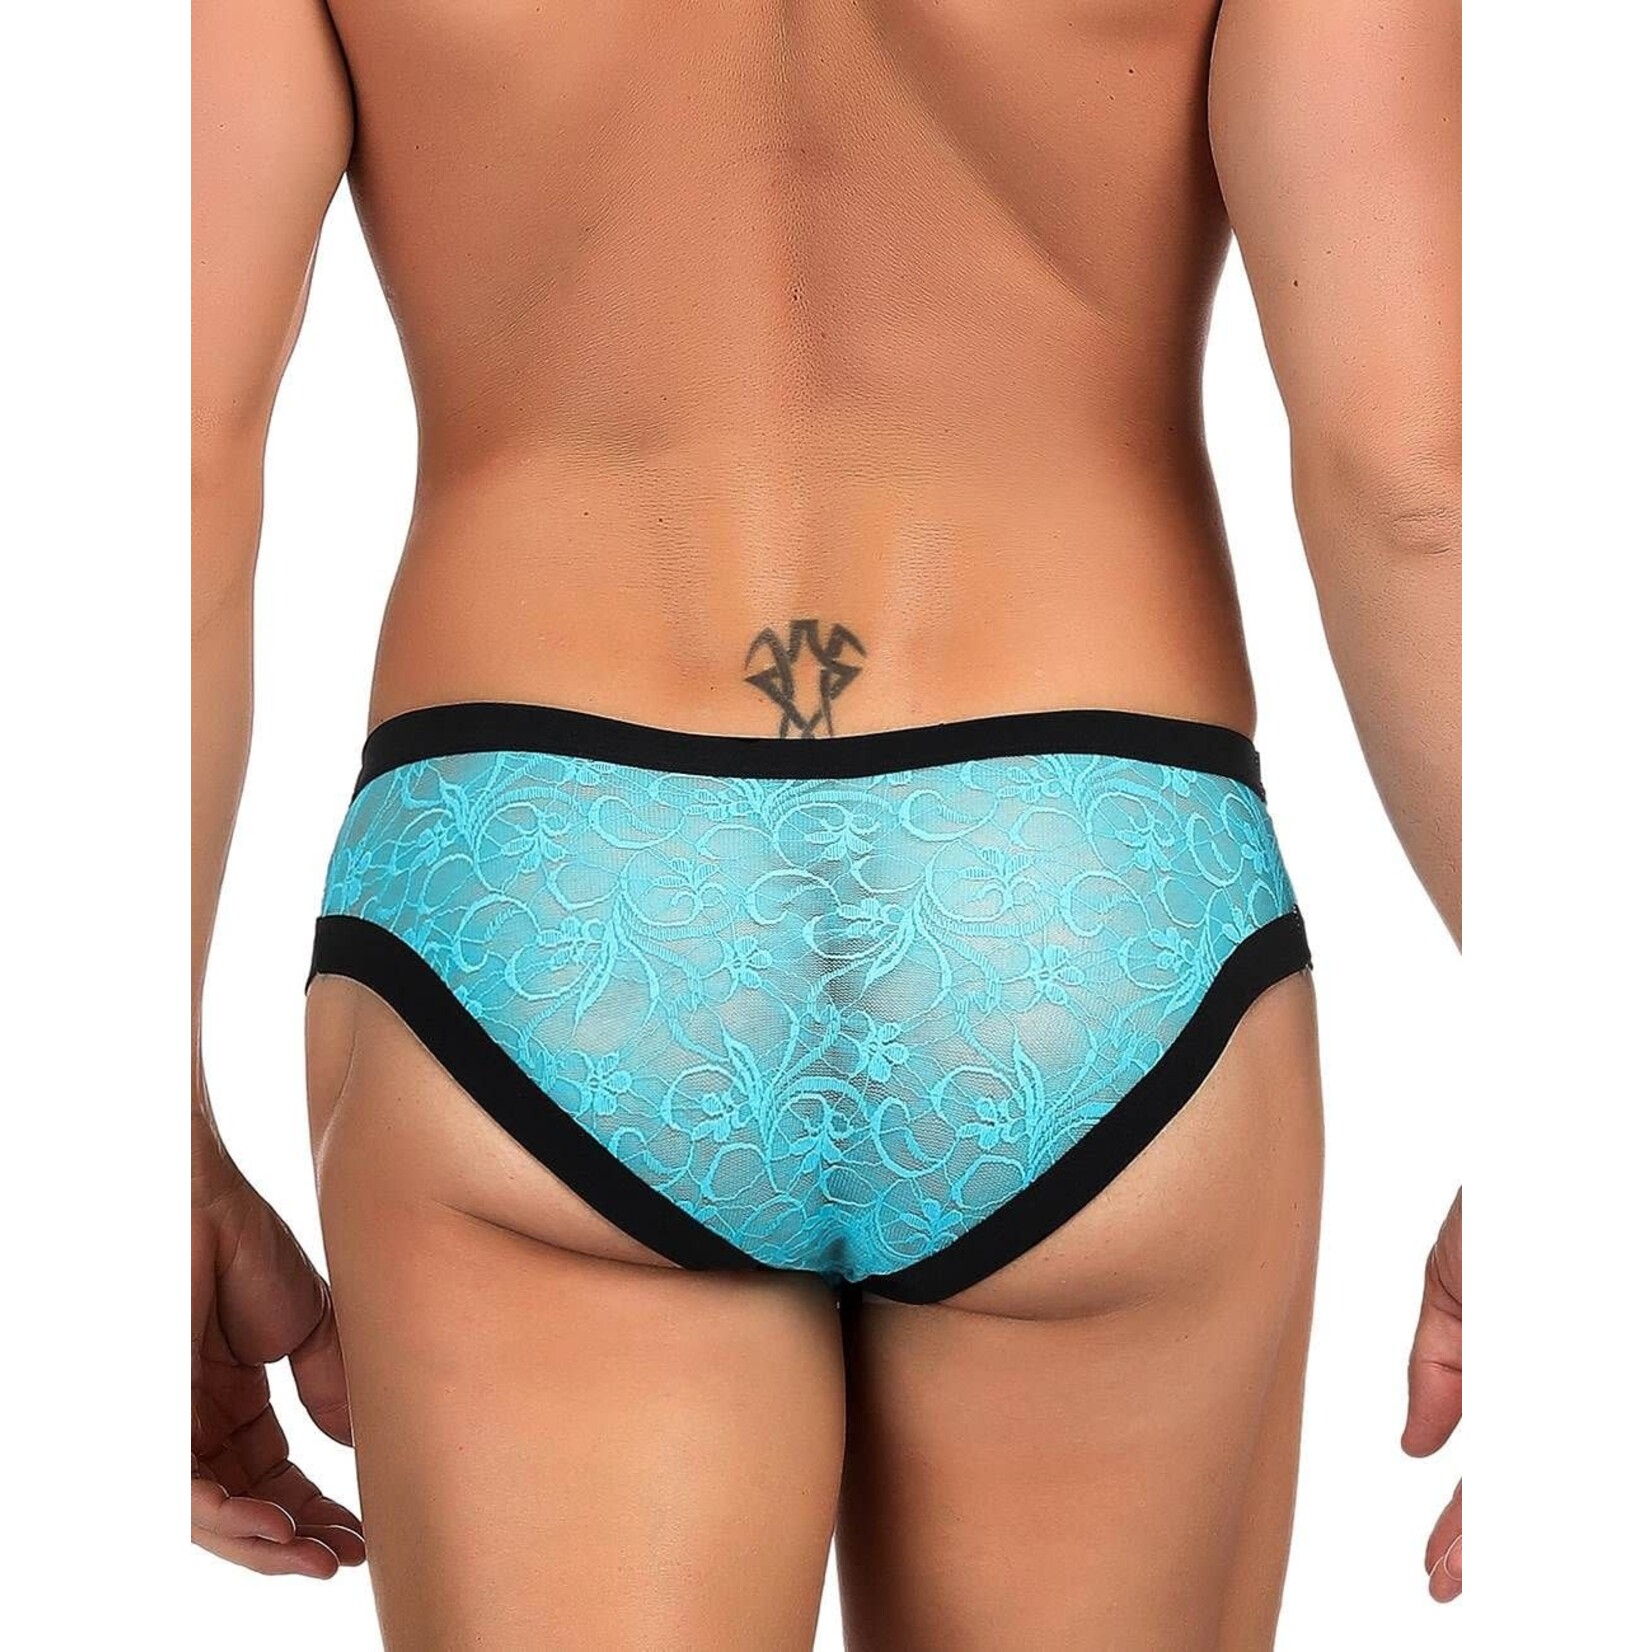 OH YEAH! -  SEXY BLUE LACE PANTY FOR MEN S